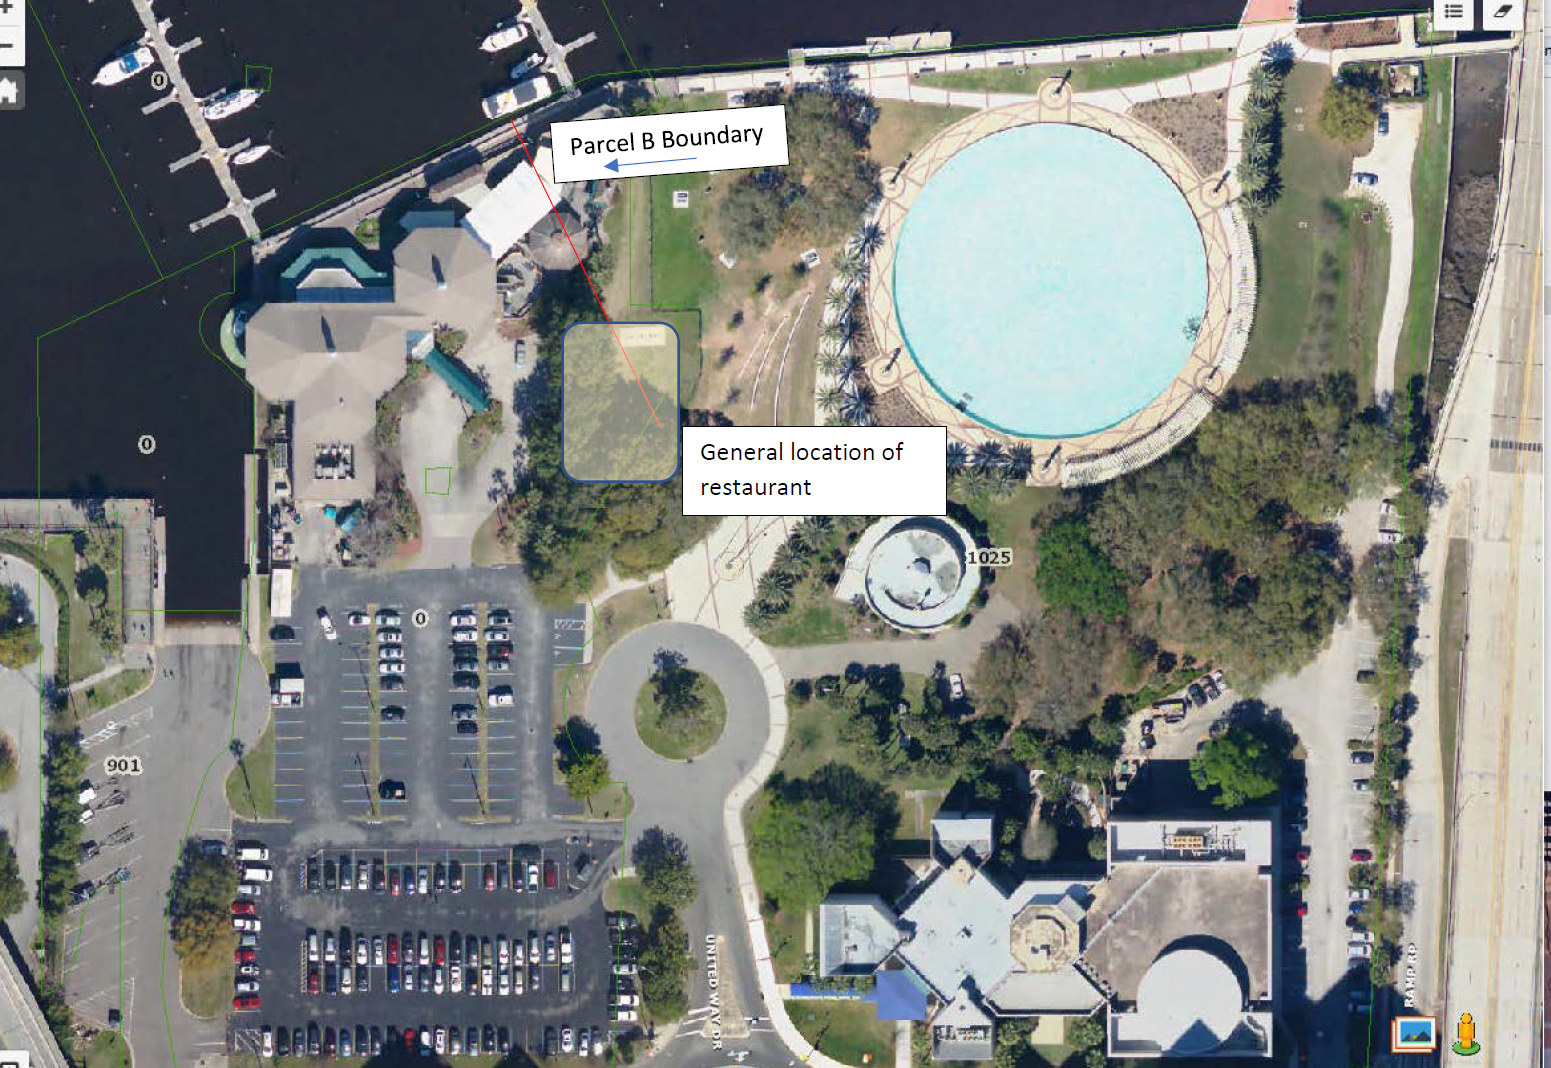 The restaurant site is shown in this map provided to the DIA.